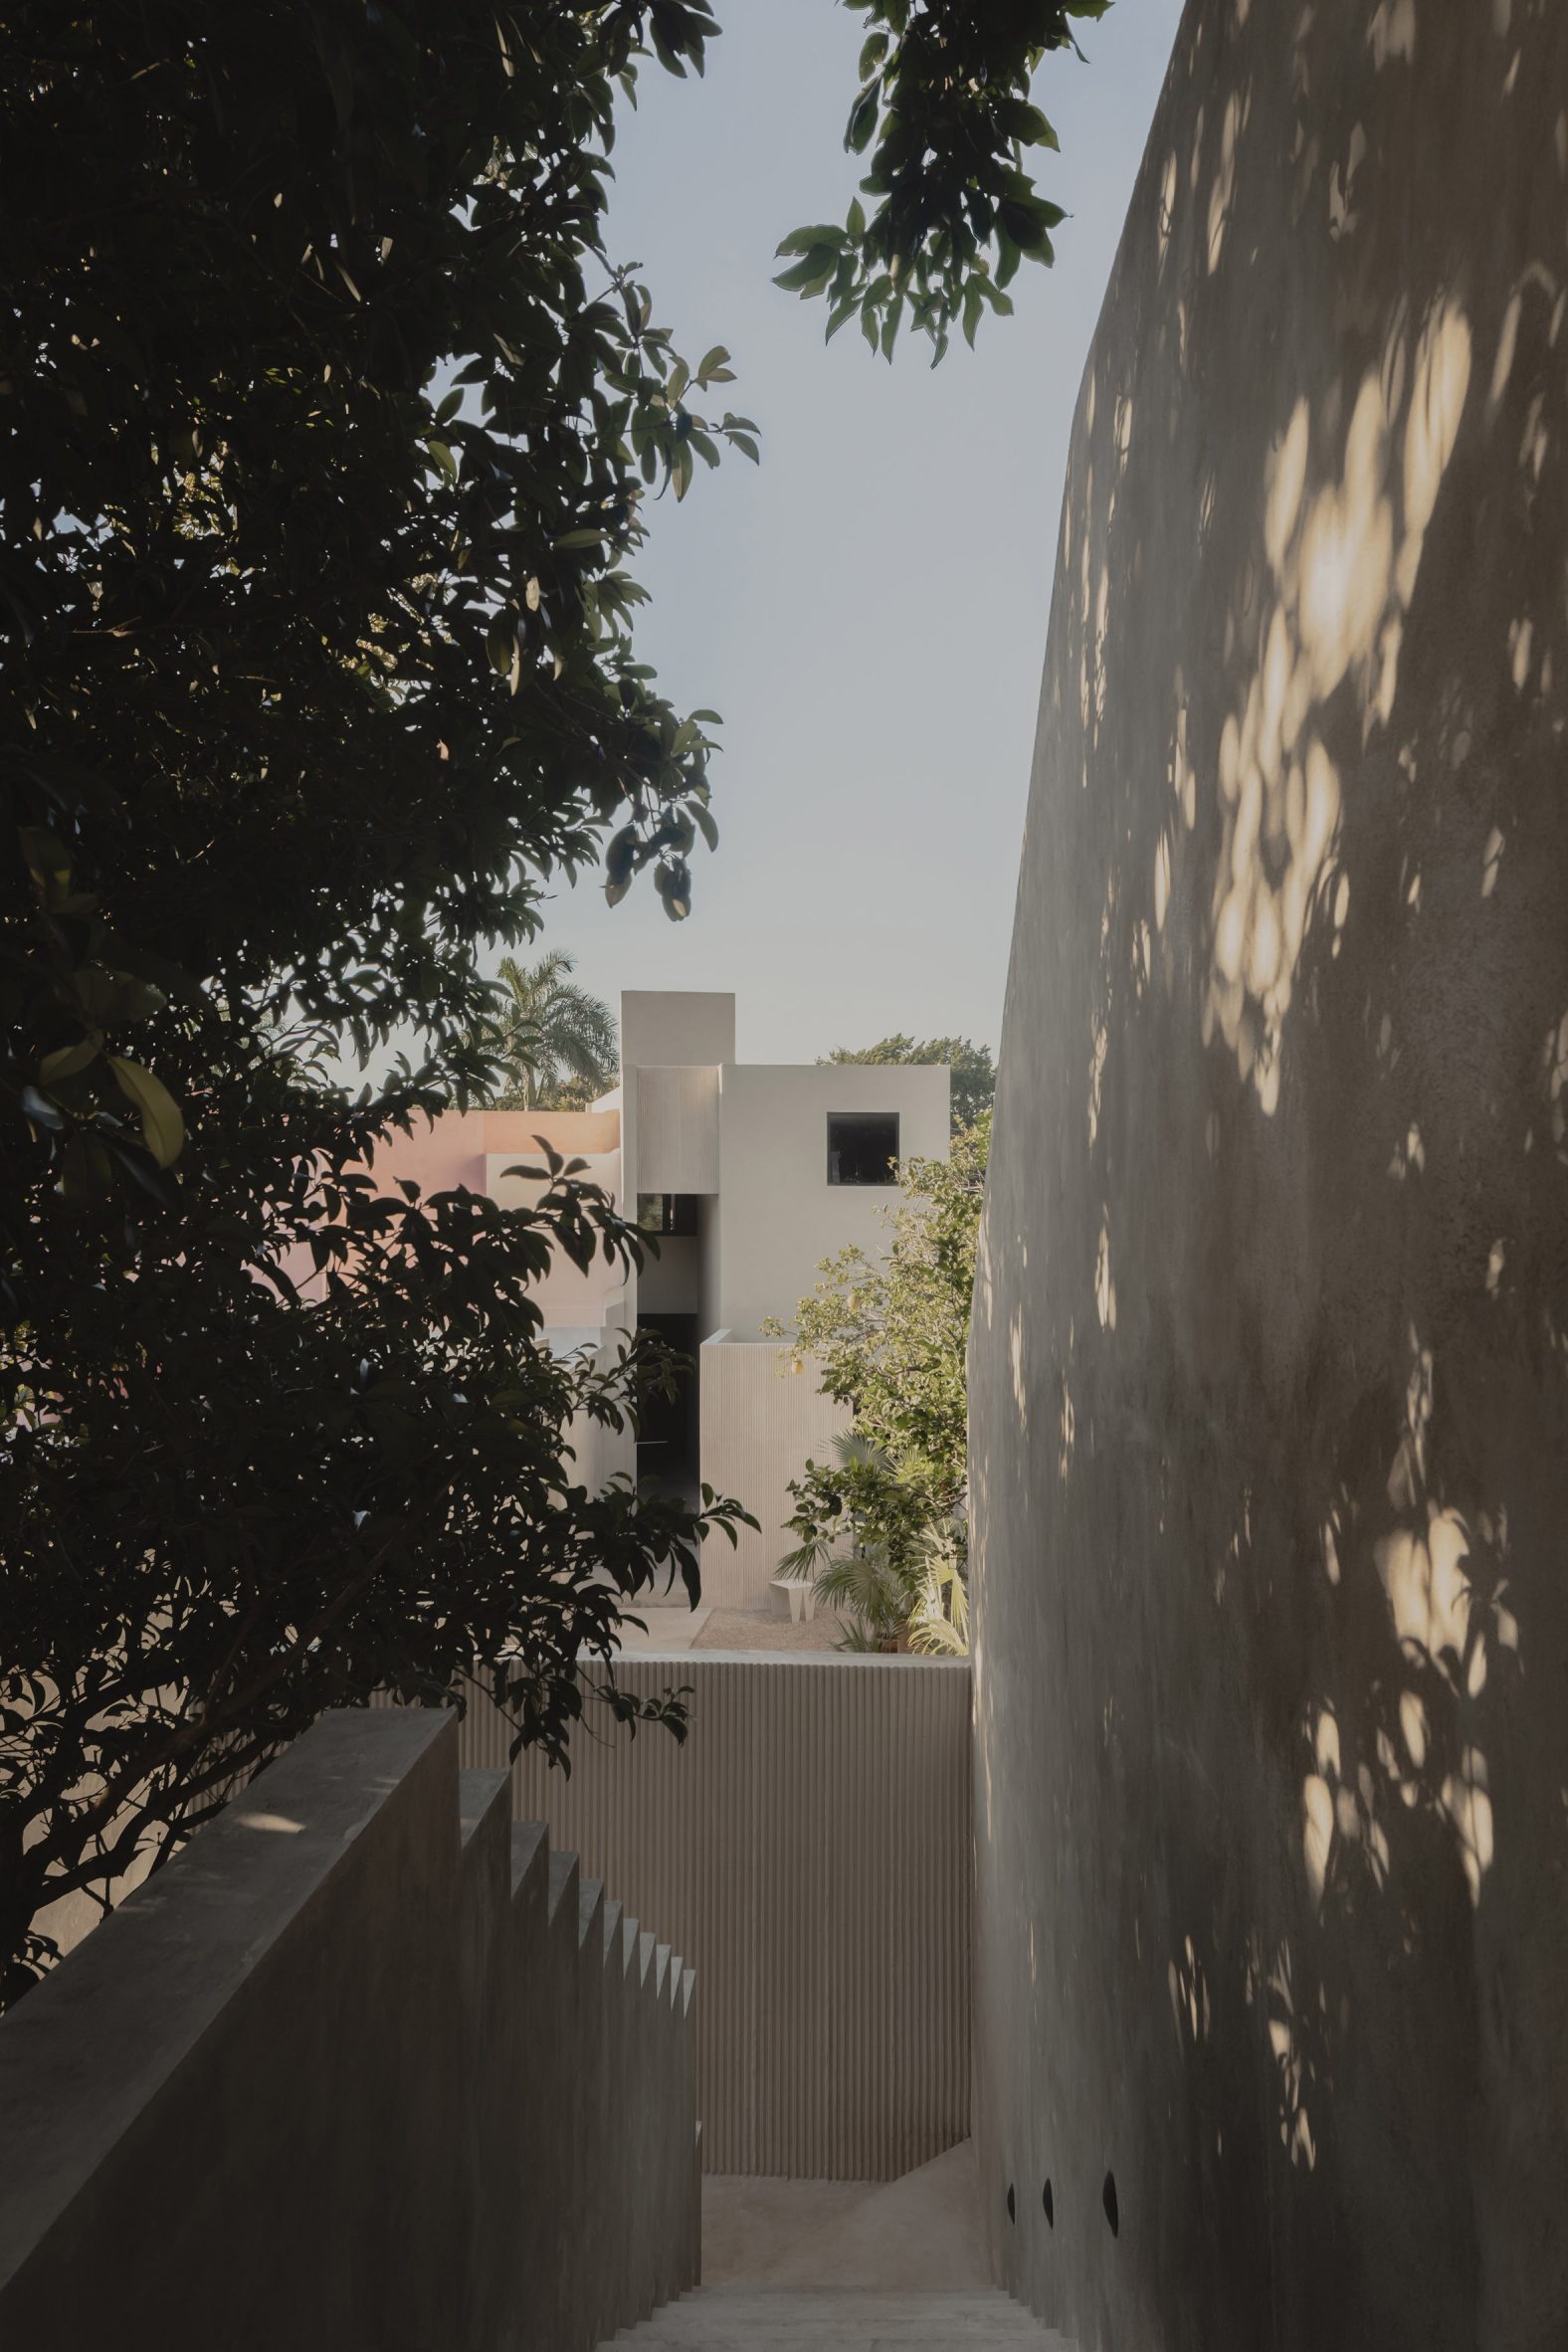 A concrete staircase overlooking a concrete house and trees